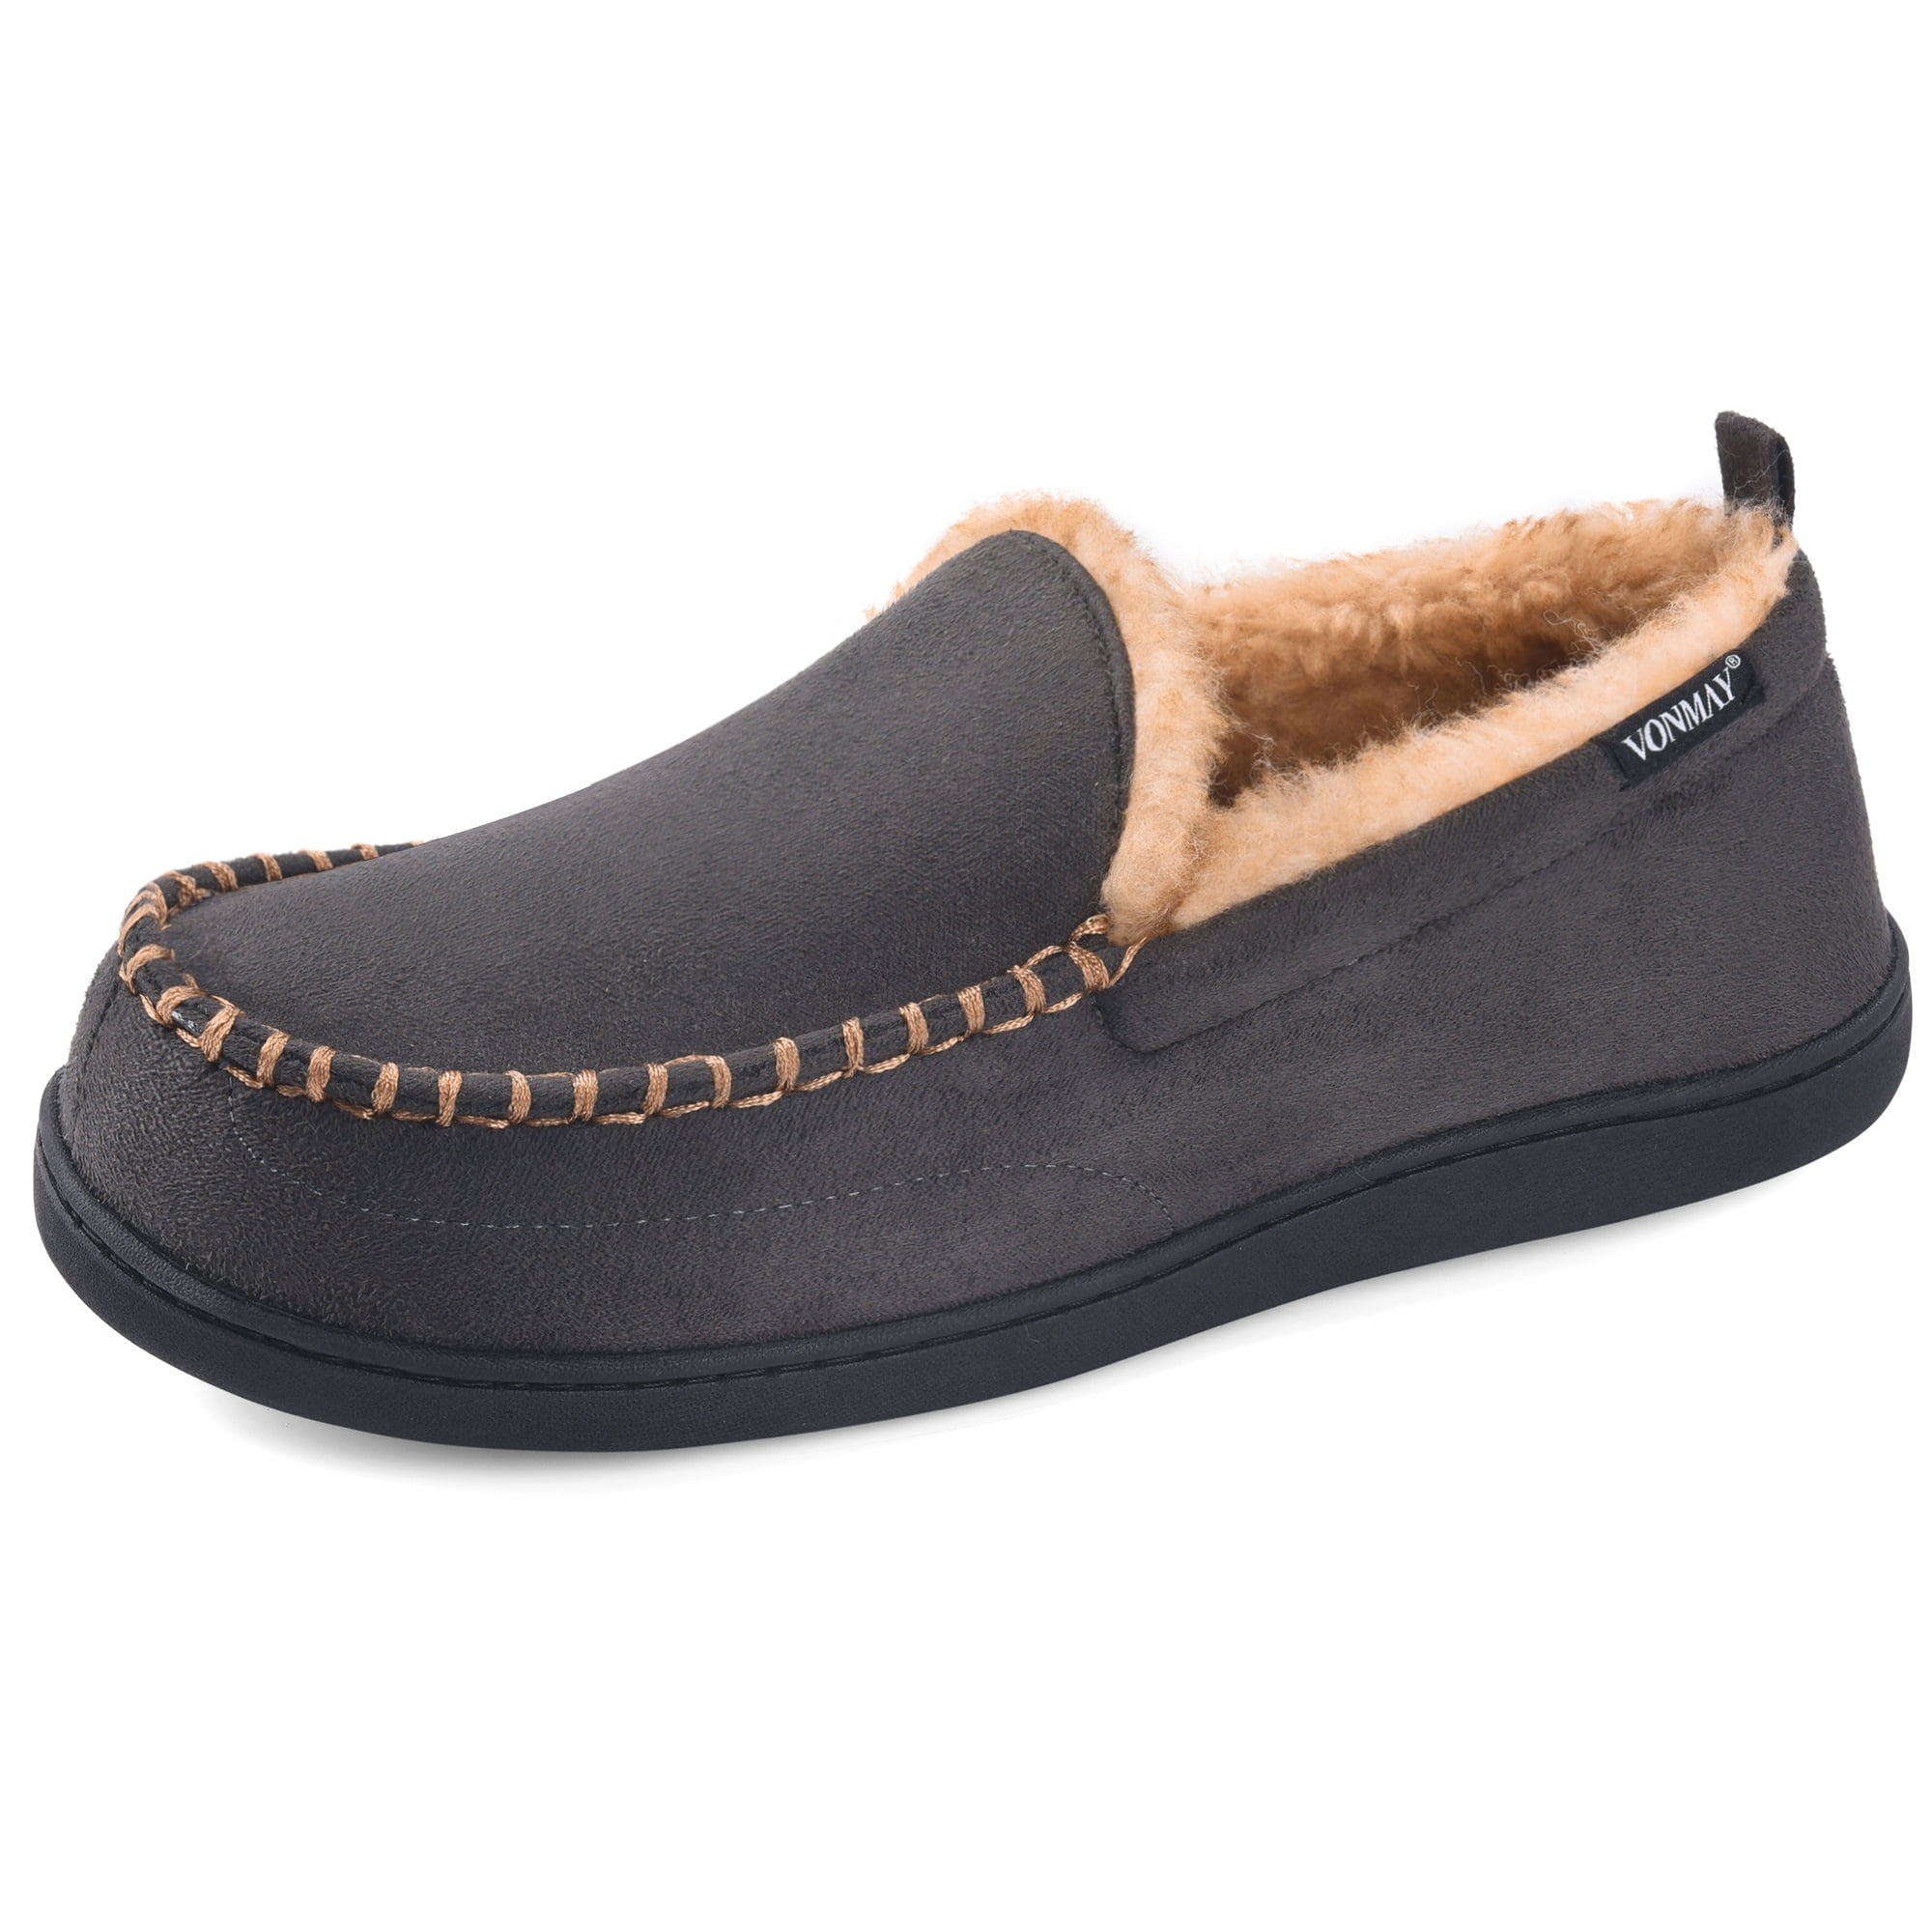 MENS SUPER LIGHTWEIGHT SLIP ON WARM WINTER COMFY MOCCASINS SLIPPERS SHOES SIZE 